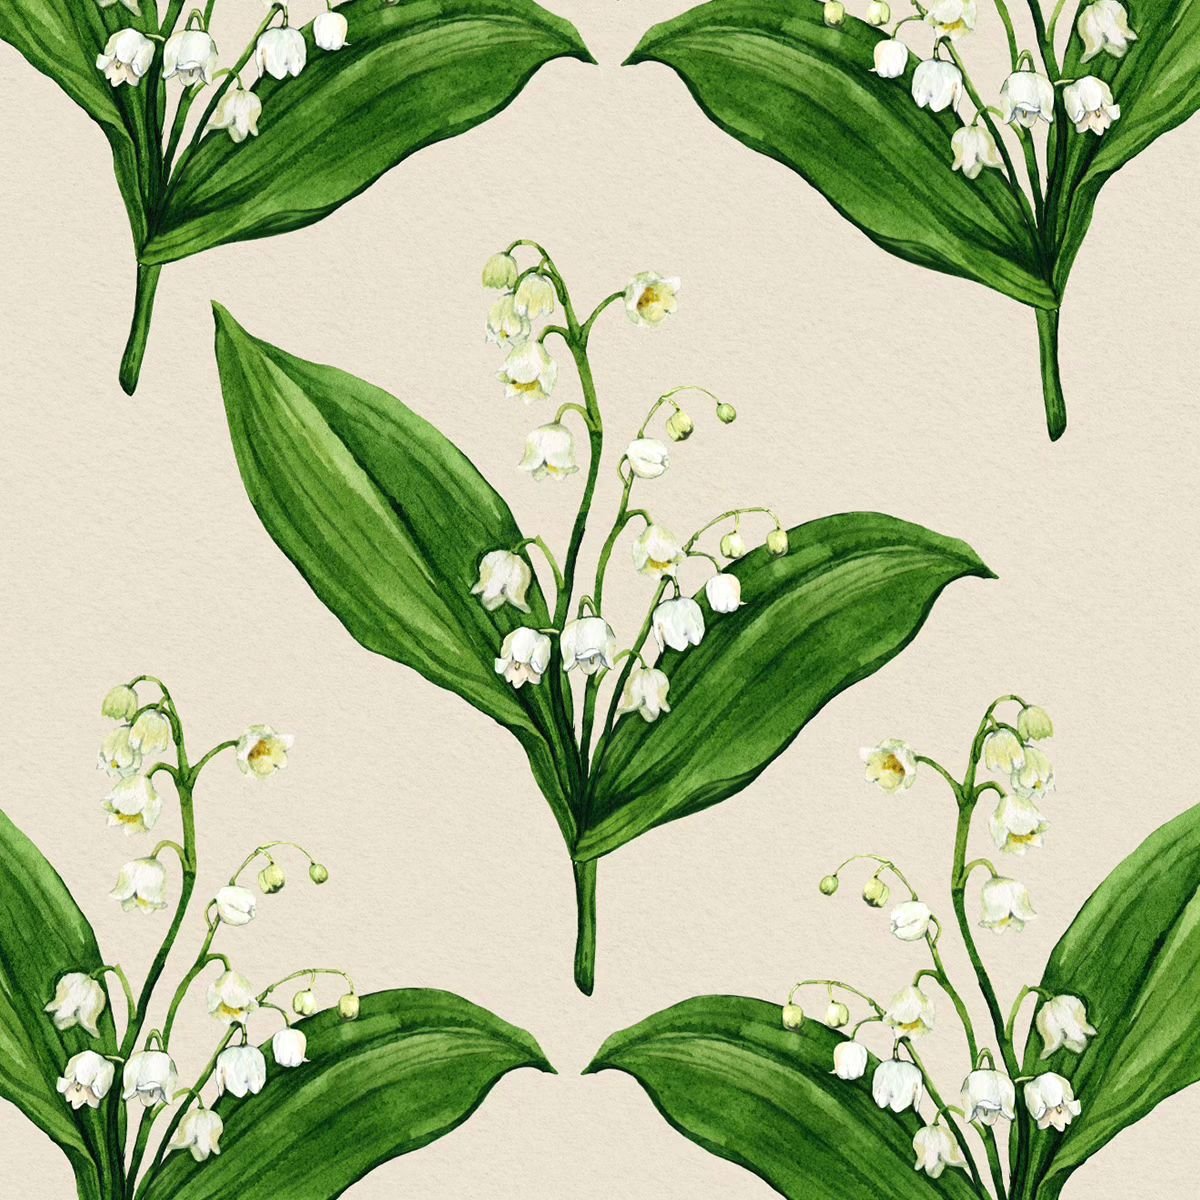 Lily of the valley, May birth flower 💚
.
.
#lilyofthevalley #lilyofthevalleyflower #patterndesign